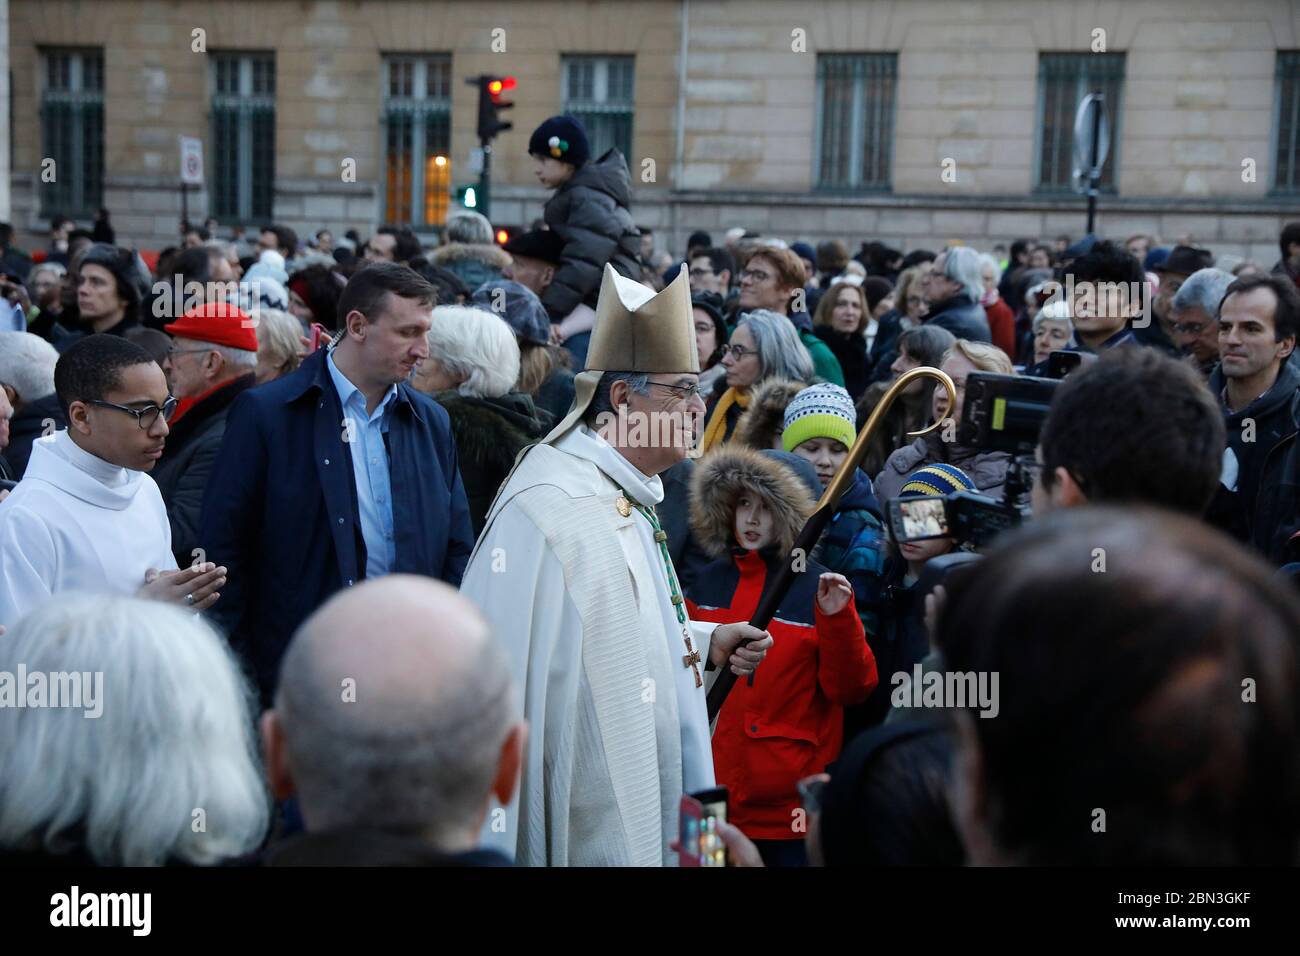 Feast of Ste Genevieve in Paris, France. Stock Photo